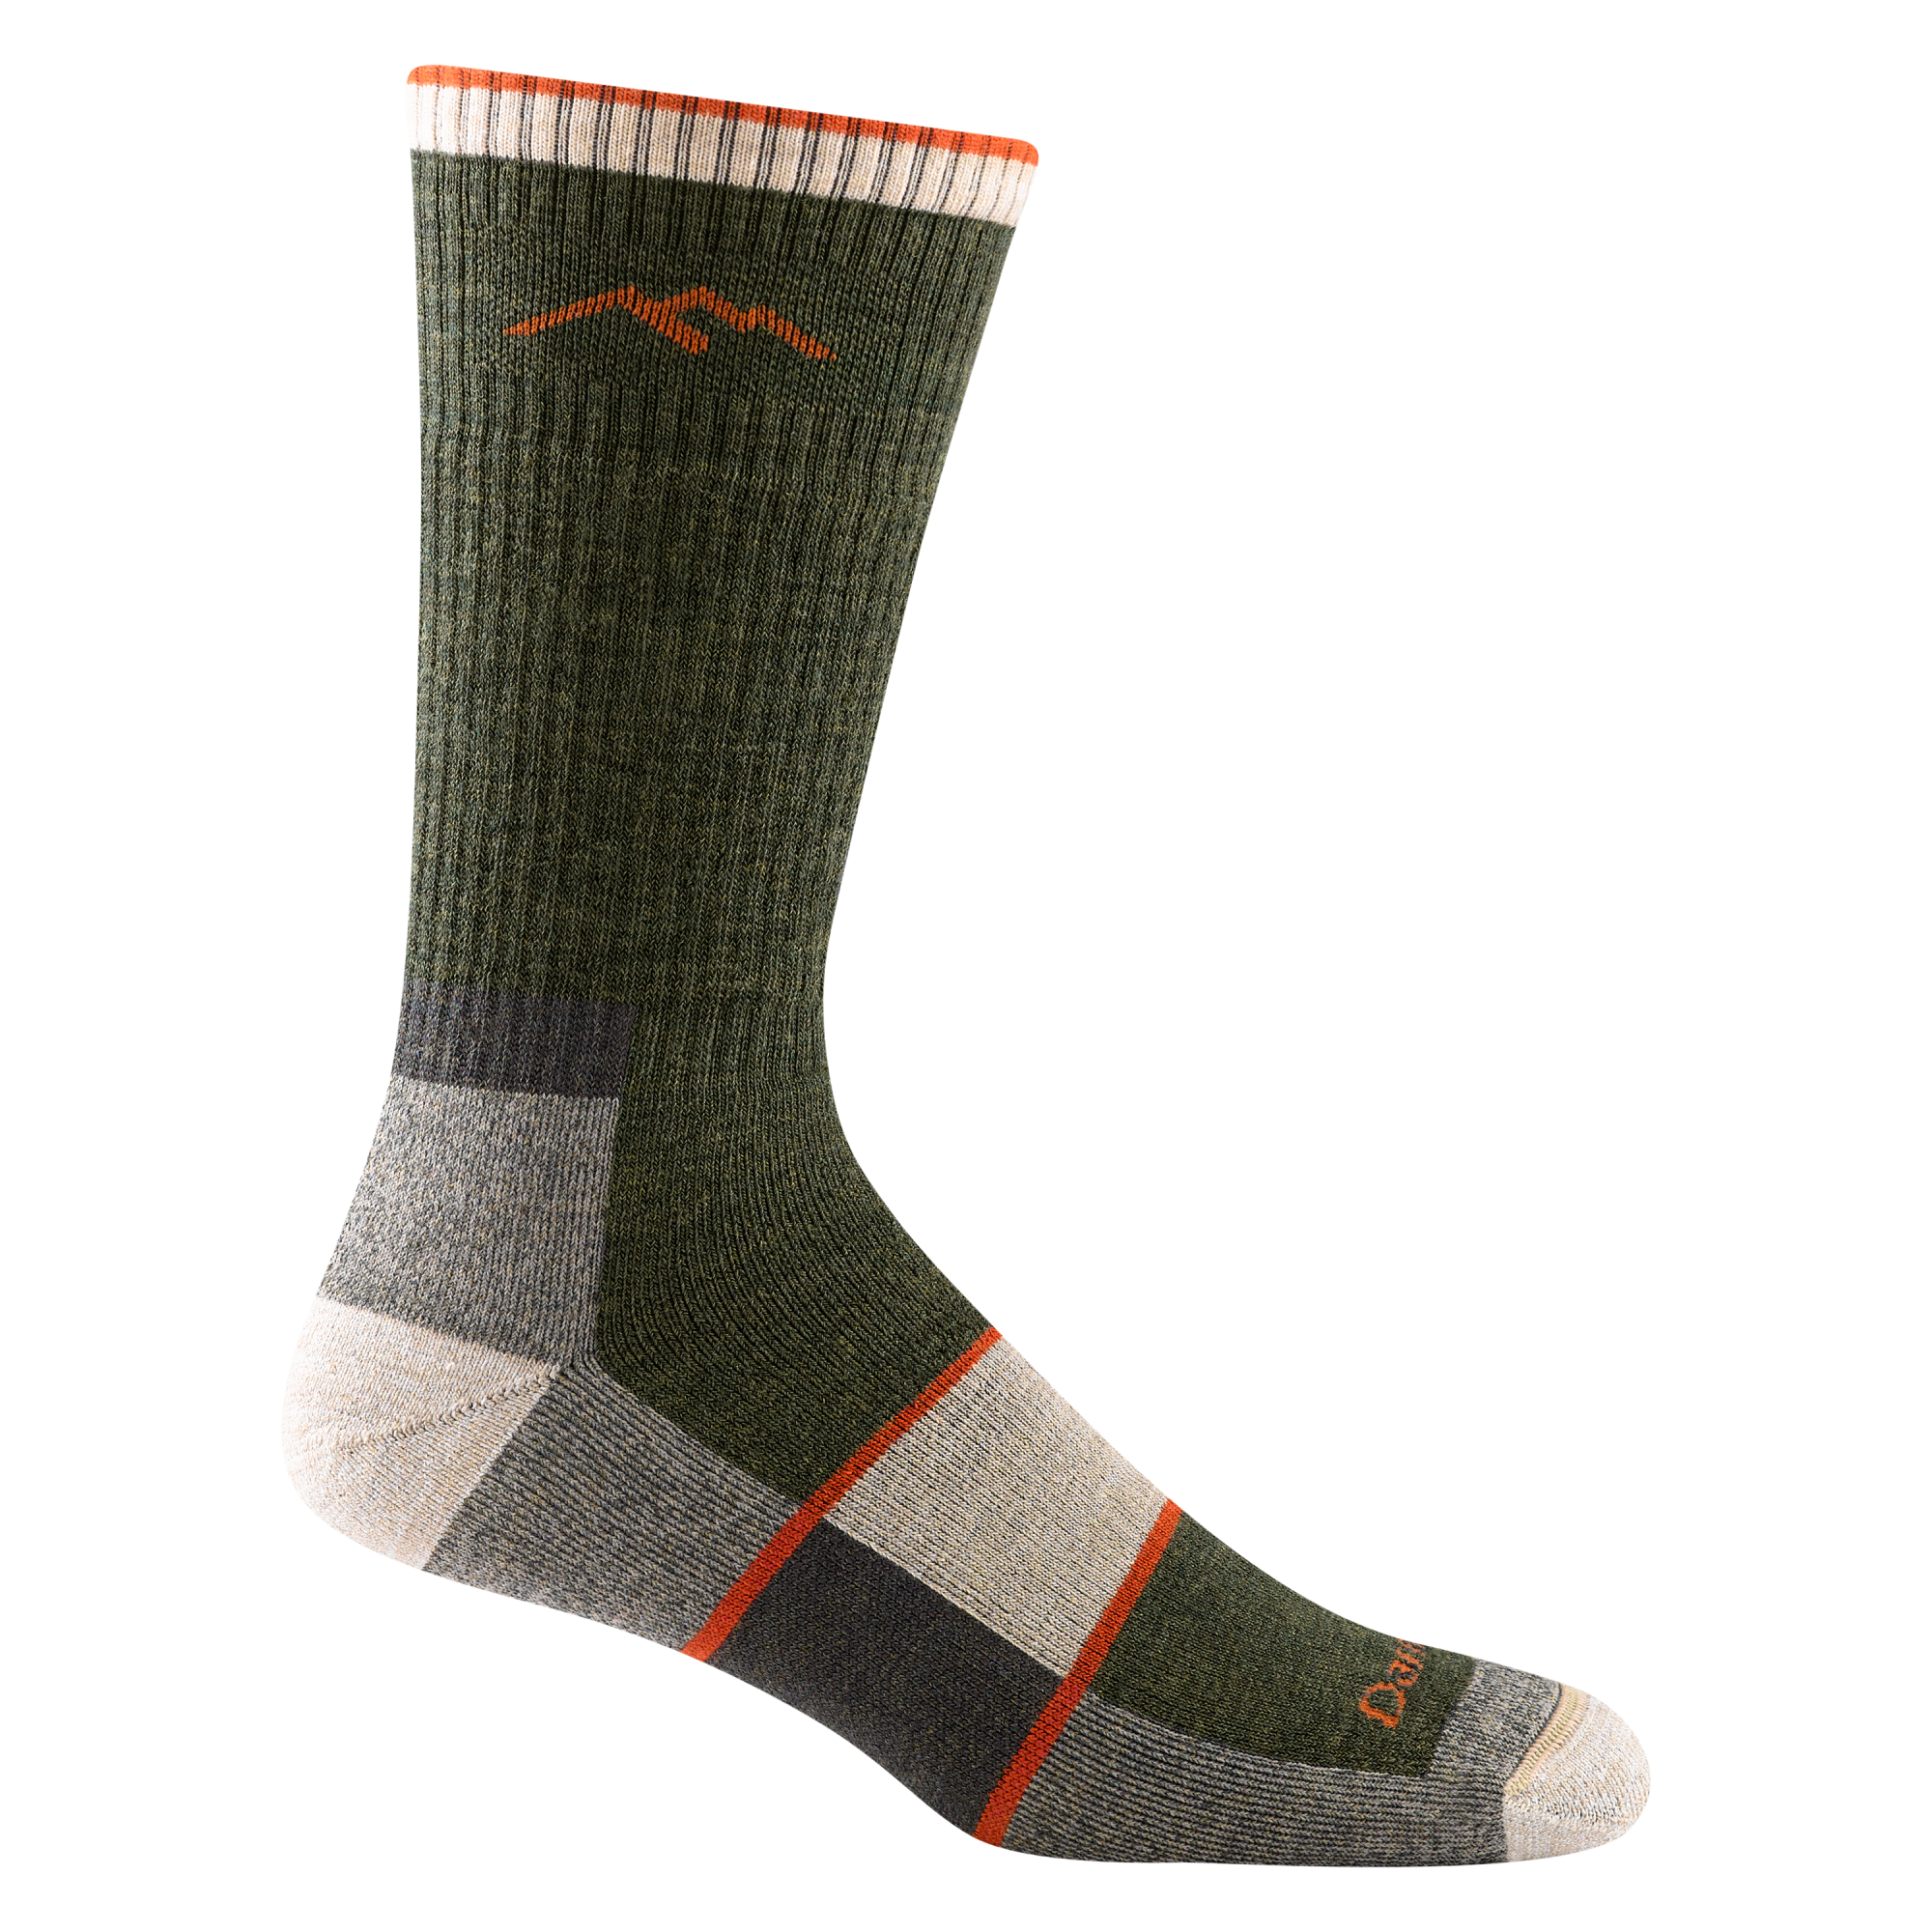 1405 men's hiking boot sock in olive green with white toe/heel accents and forefoot color block with 2 orange stripes